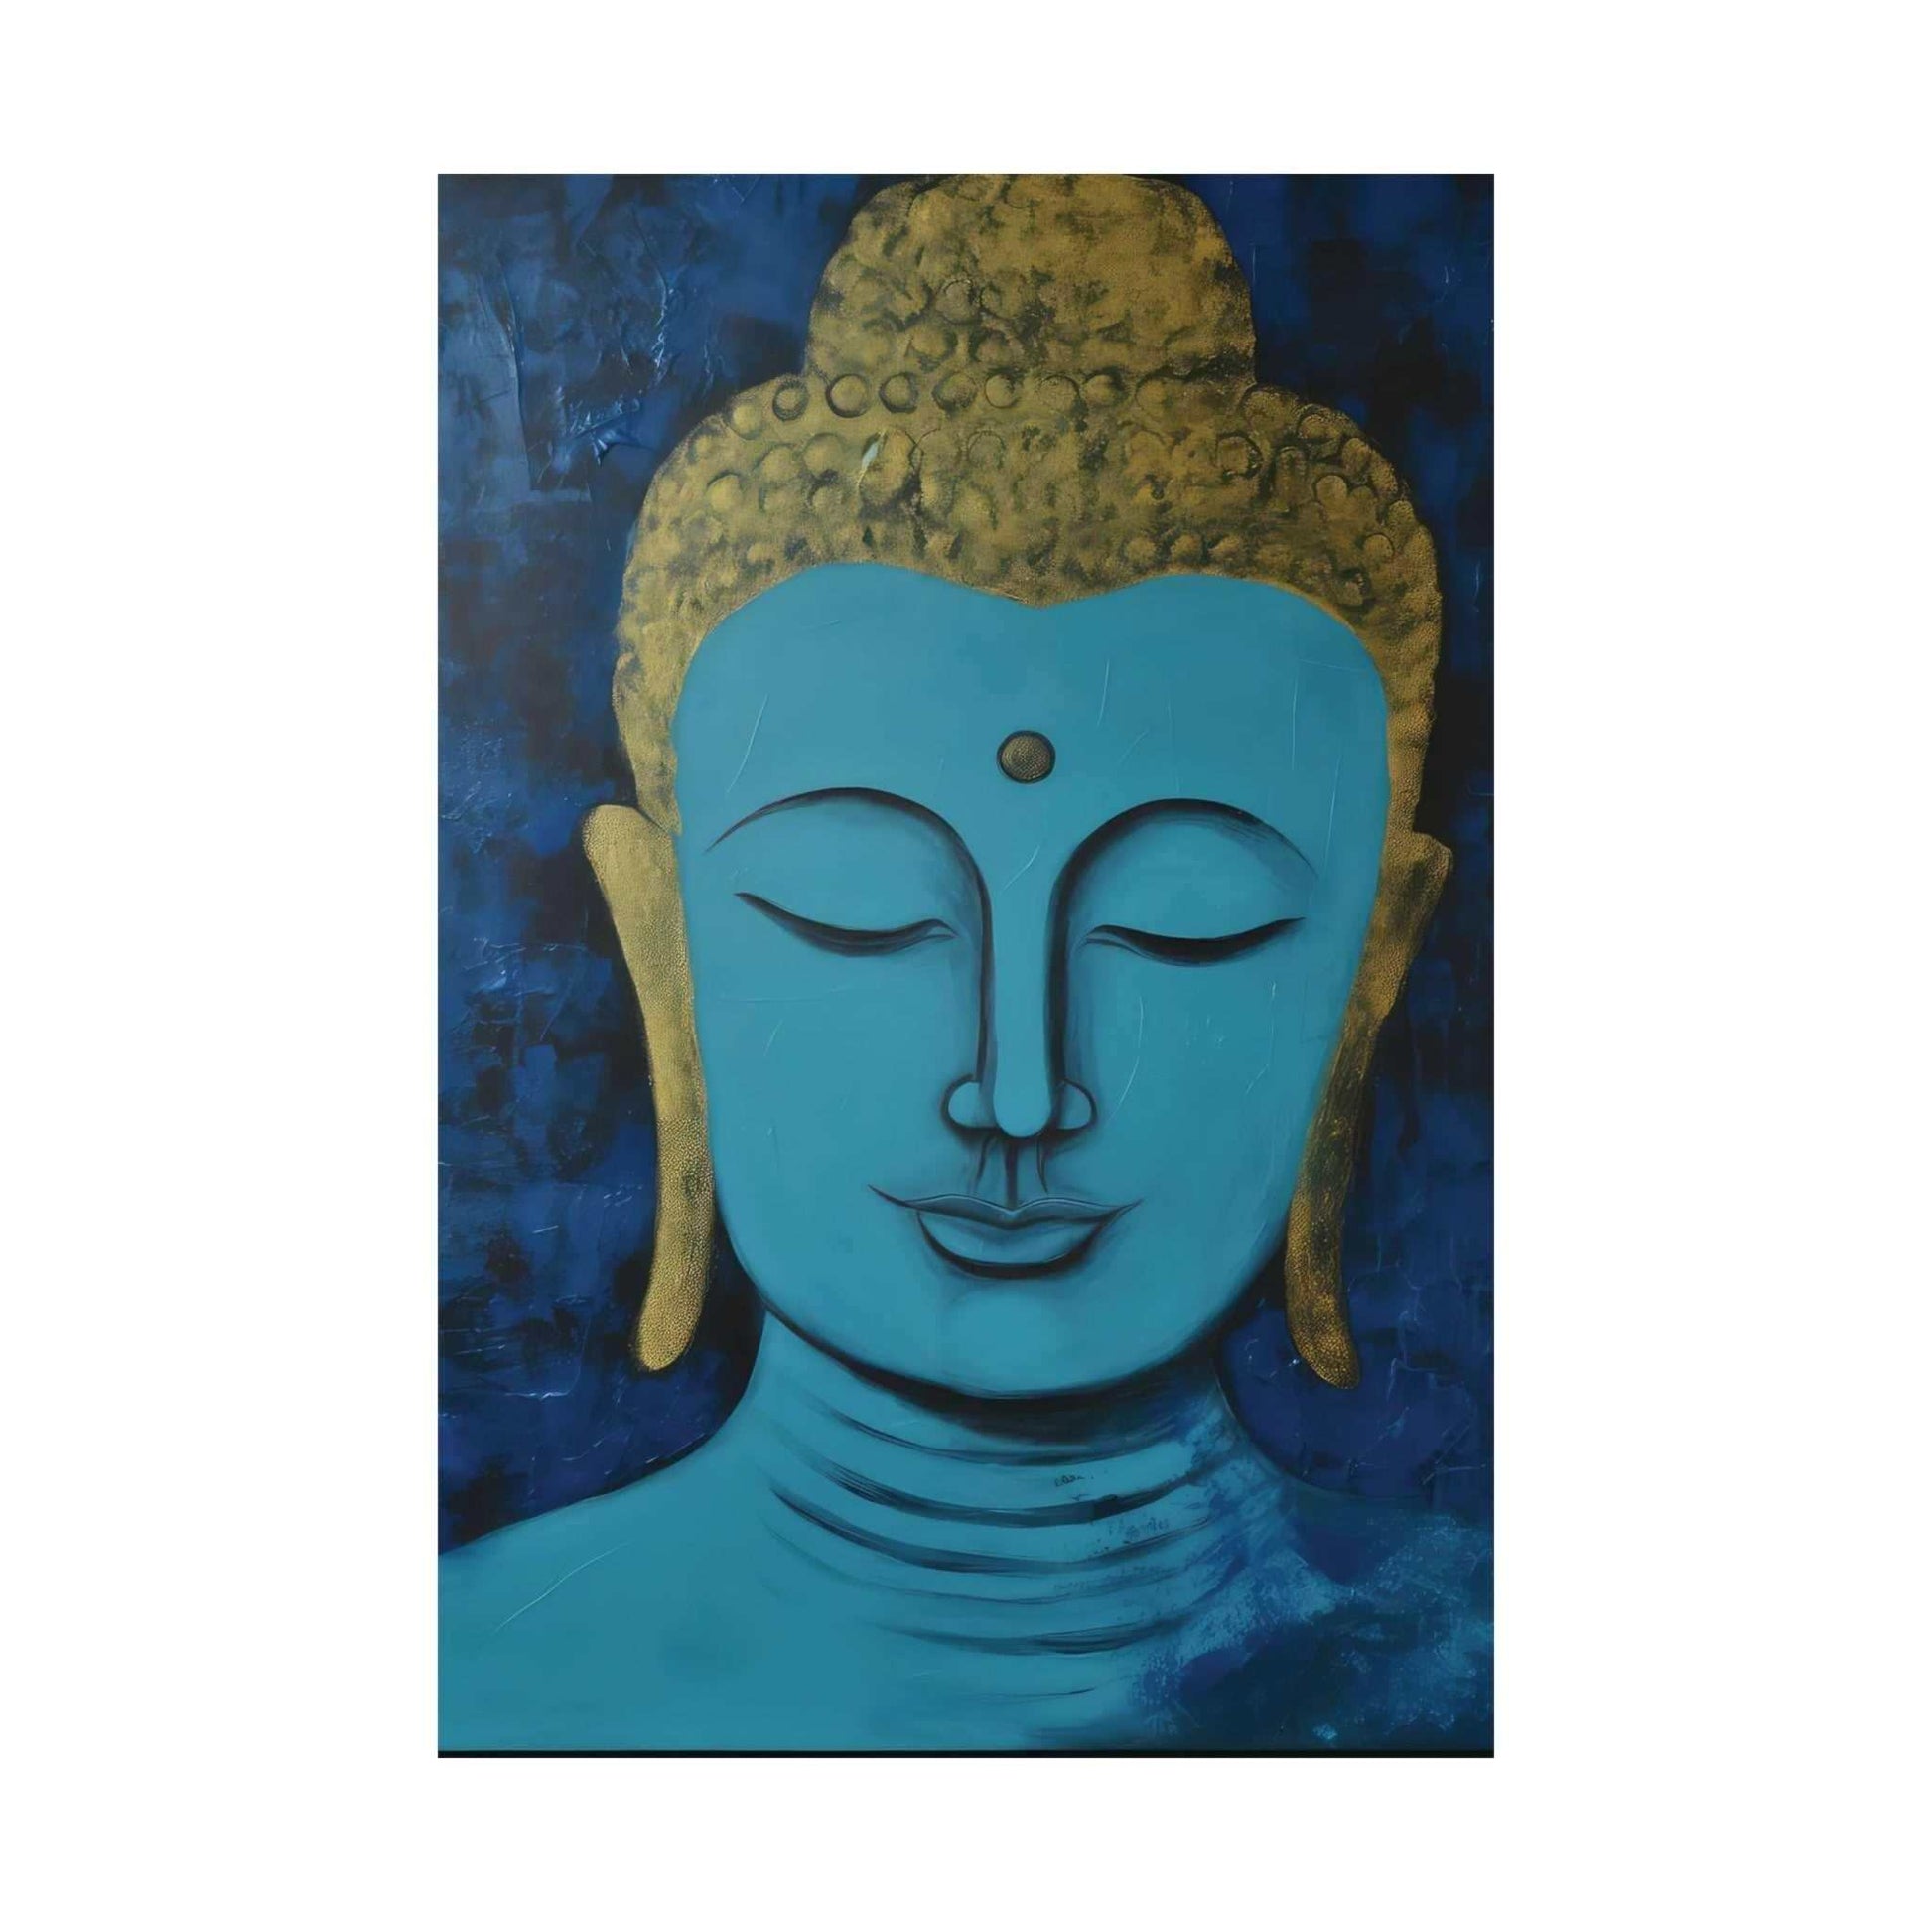 ZenArtBliss.com's Buddha in Art Oregon poster, featuring a serene Buddha head in blue and gold, encapsulating the essence of Oregon's peaceful spirit.